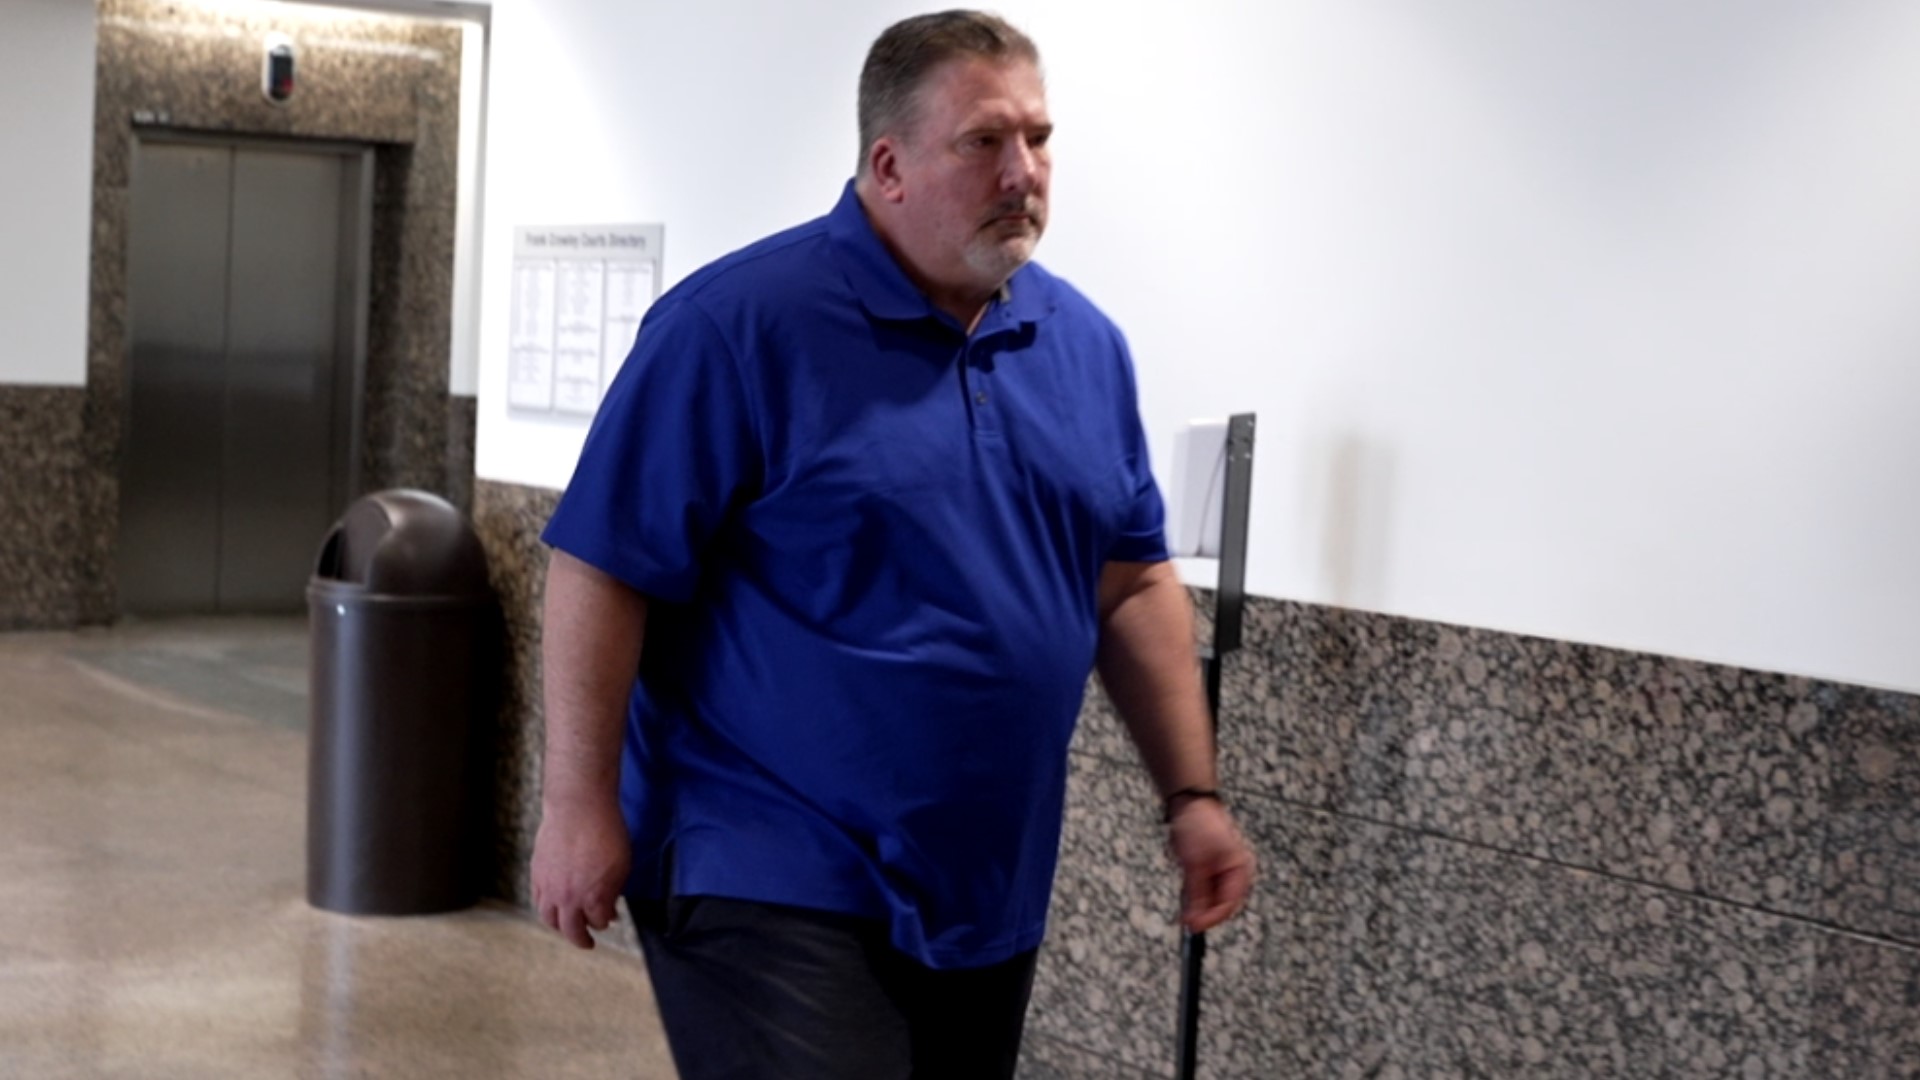 Families who said they lost homes to William Baldridge's tactics said they expected him to plead guilty in court on Friday. They left the proceedings disappointed.